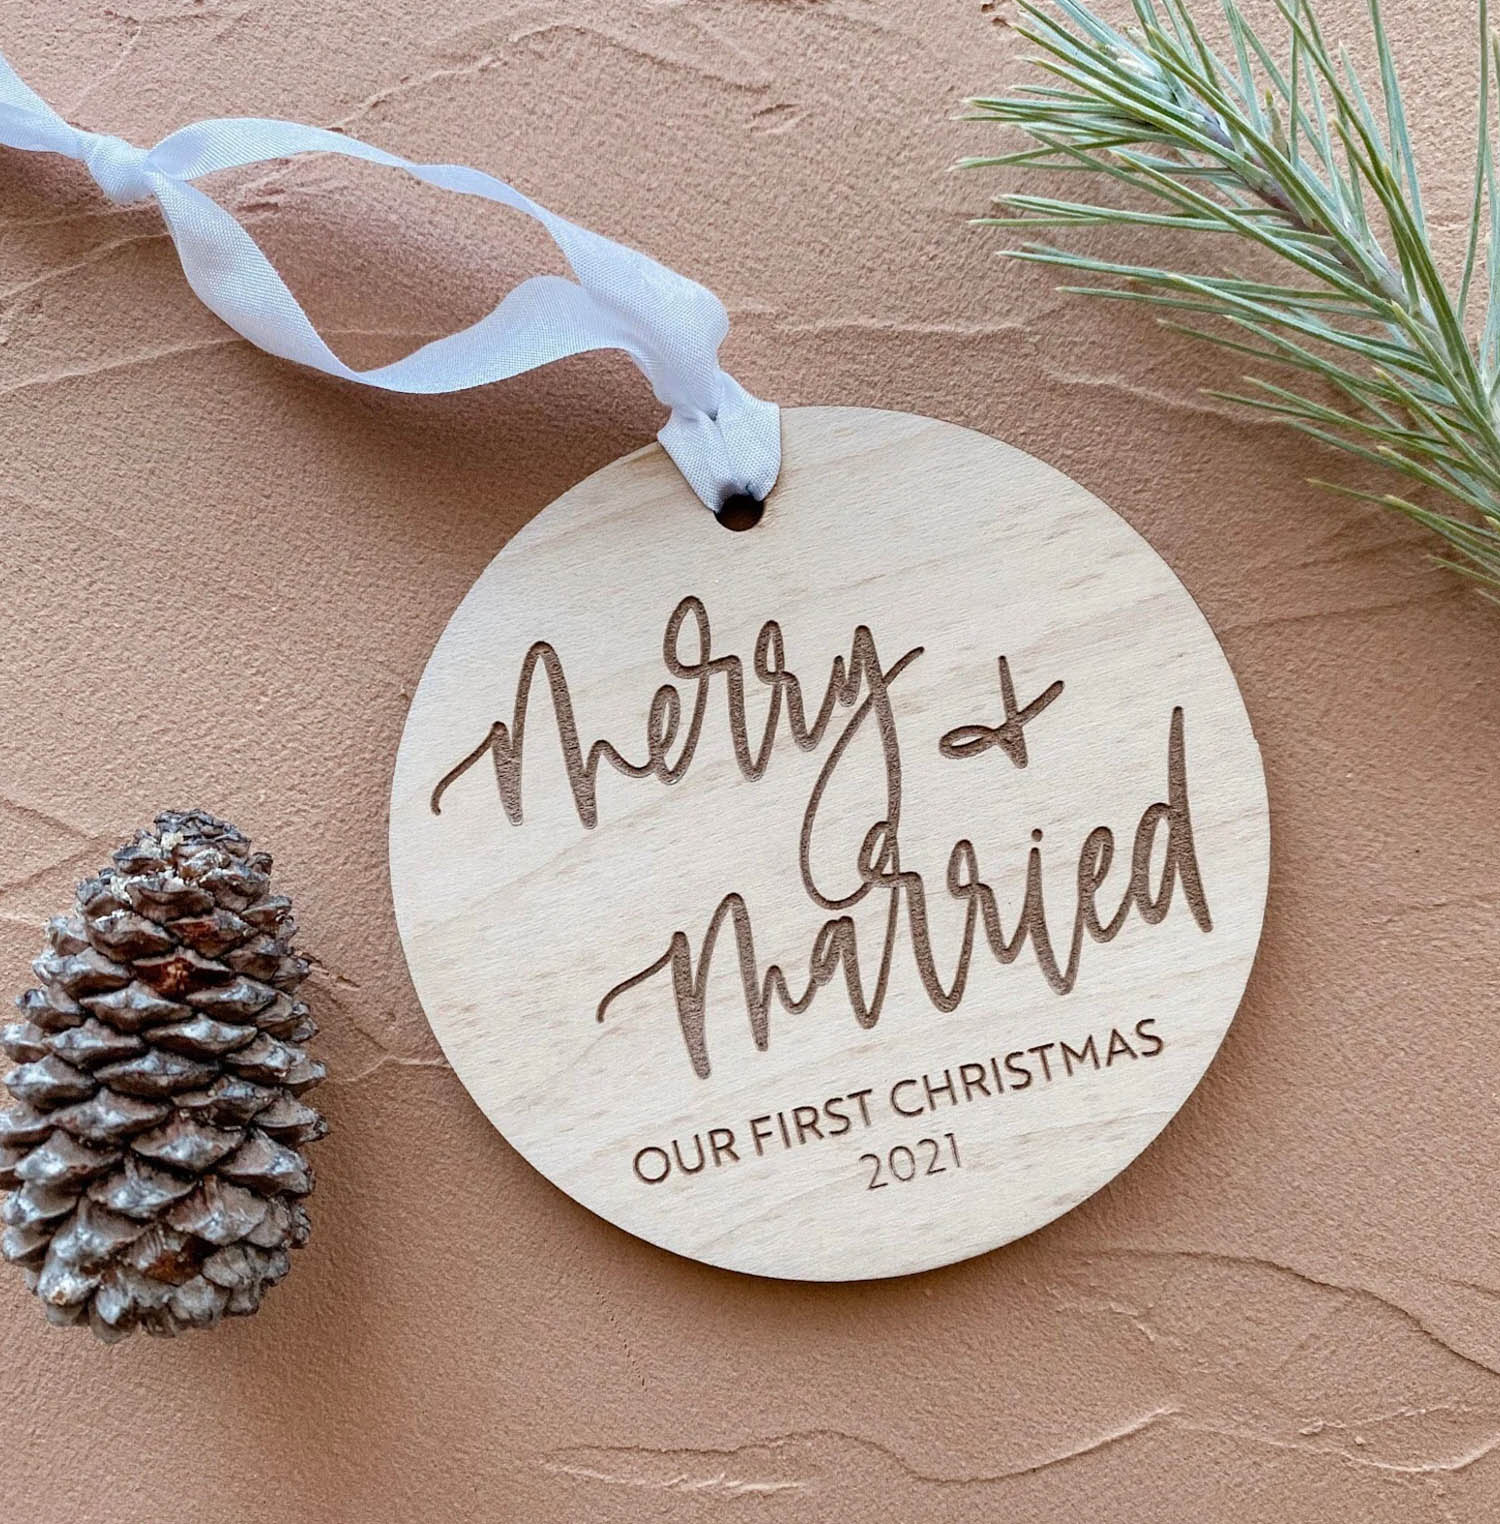 Our First Christmas Ornaments: Favorite 2021 Wedding Ornaments for Newlyweds